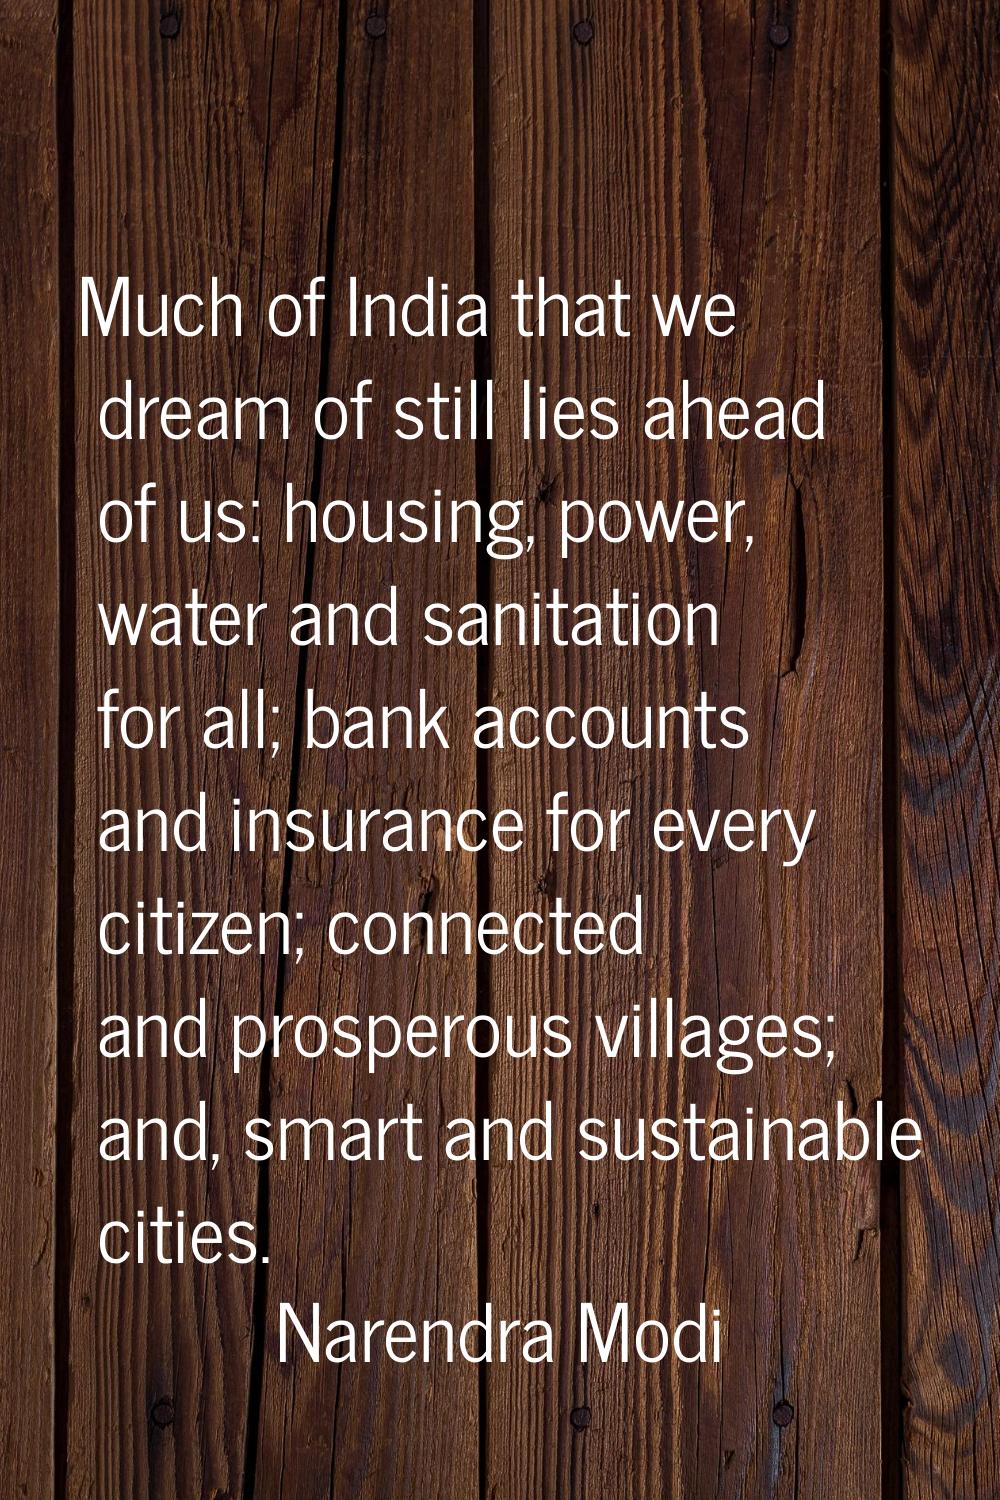 Much of India that we dream of still lies ahead of us: housing, power, water and sanitation for all